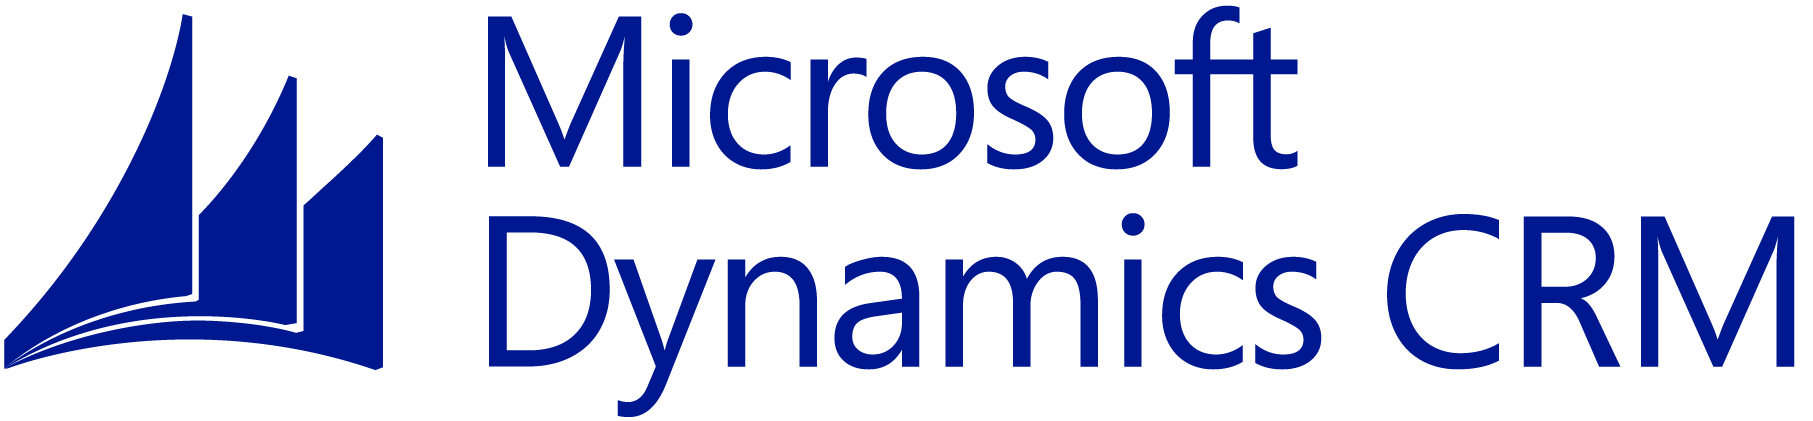 Microsoft Dynamics CRM 2013 Logo - Want to see Dynamics CRM 2013? Register for the Customer experience ...